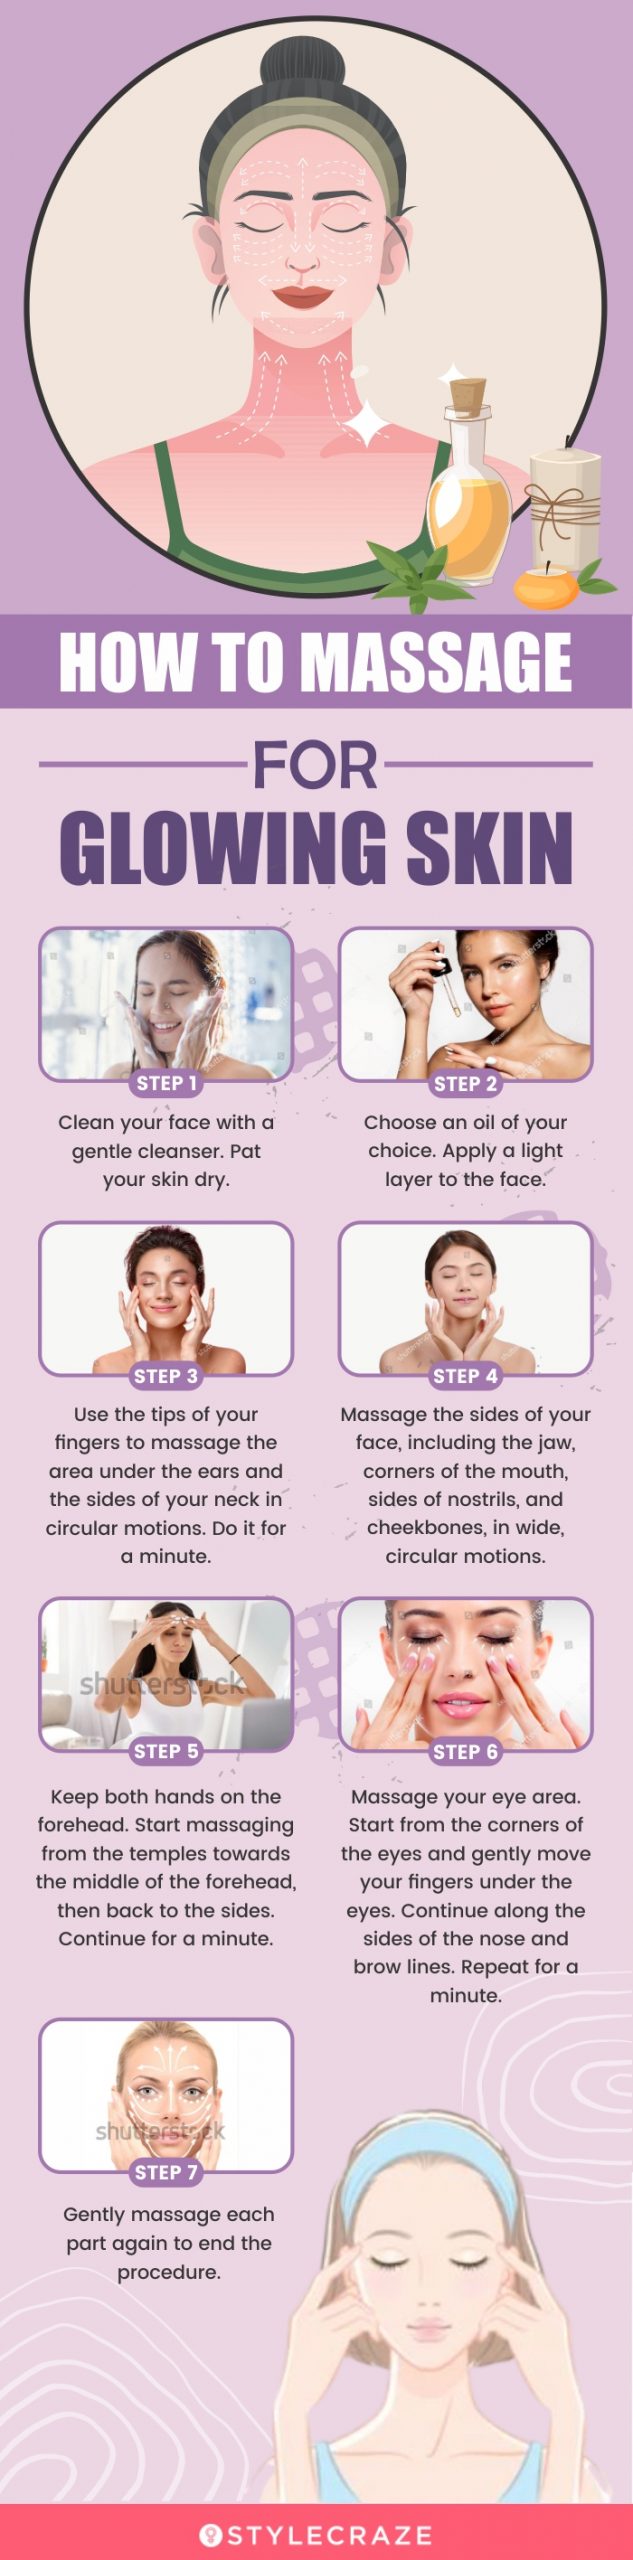 how to massage for glowing skin (infographic)